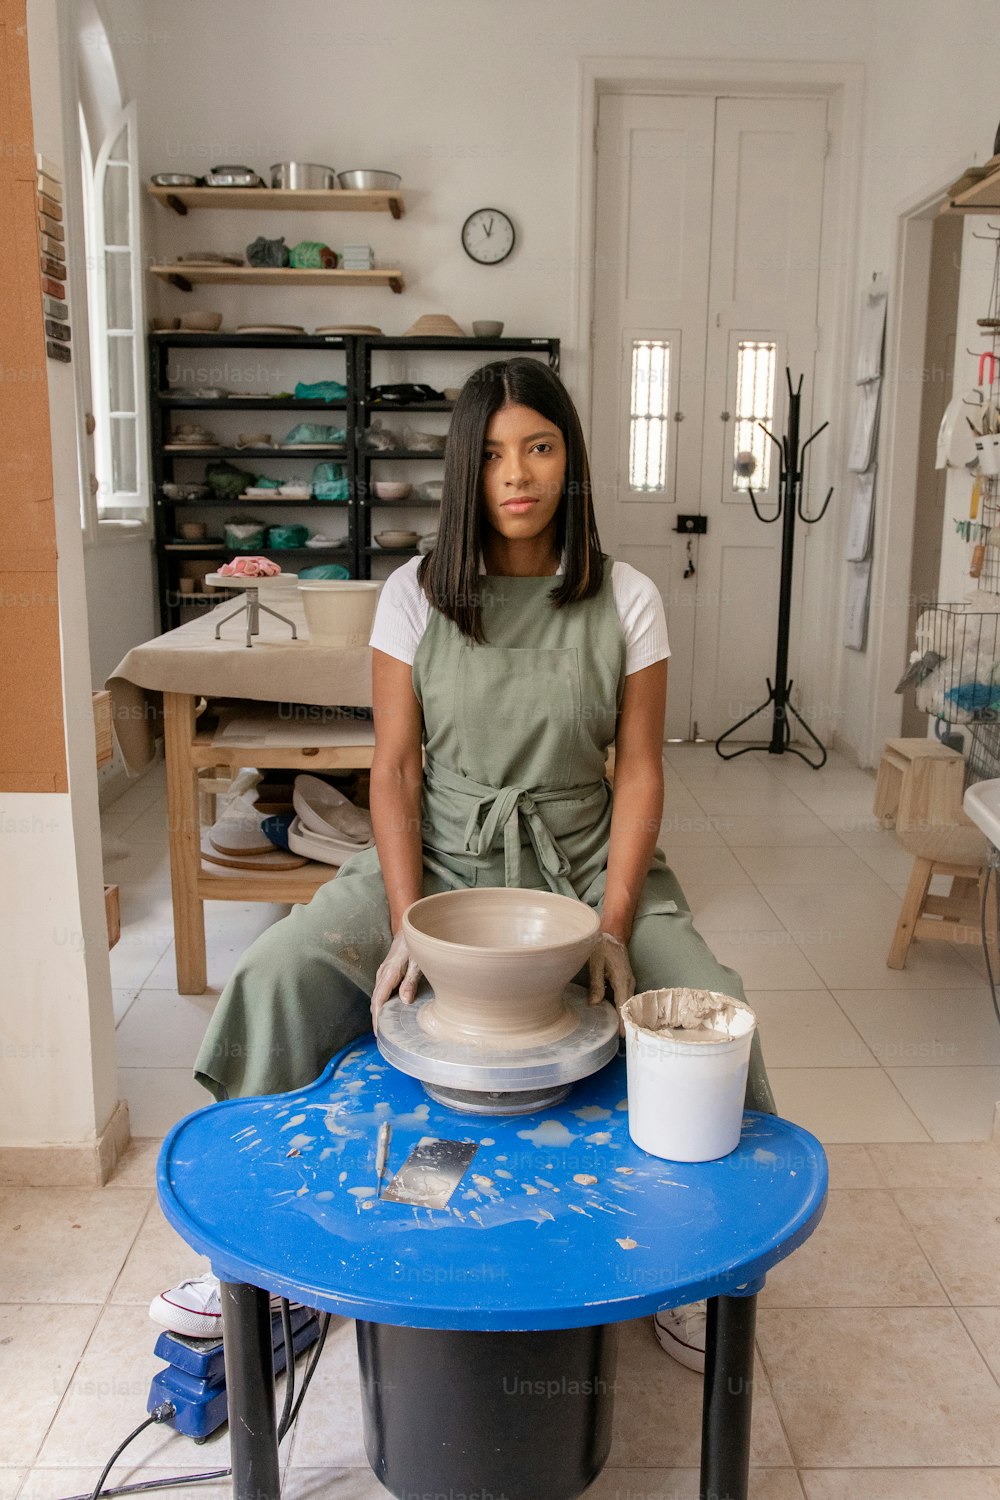 a woman sitting on a table with a bowl on it